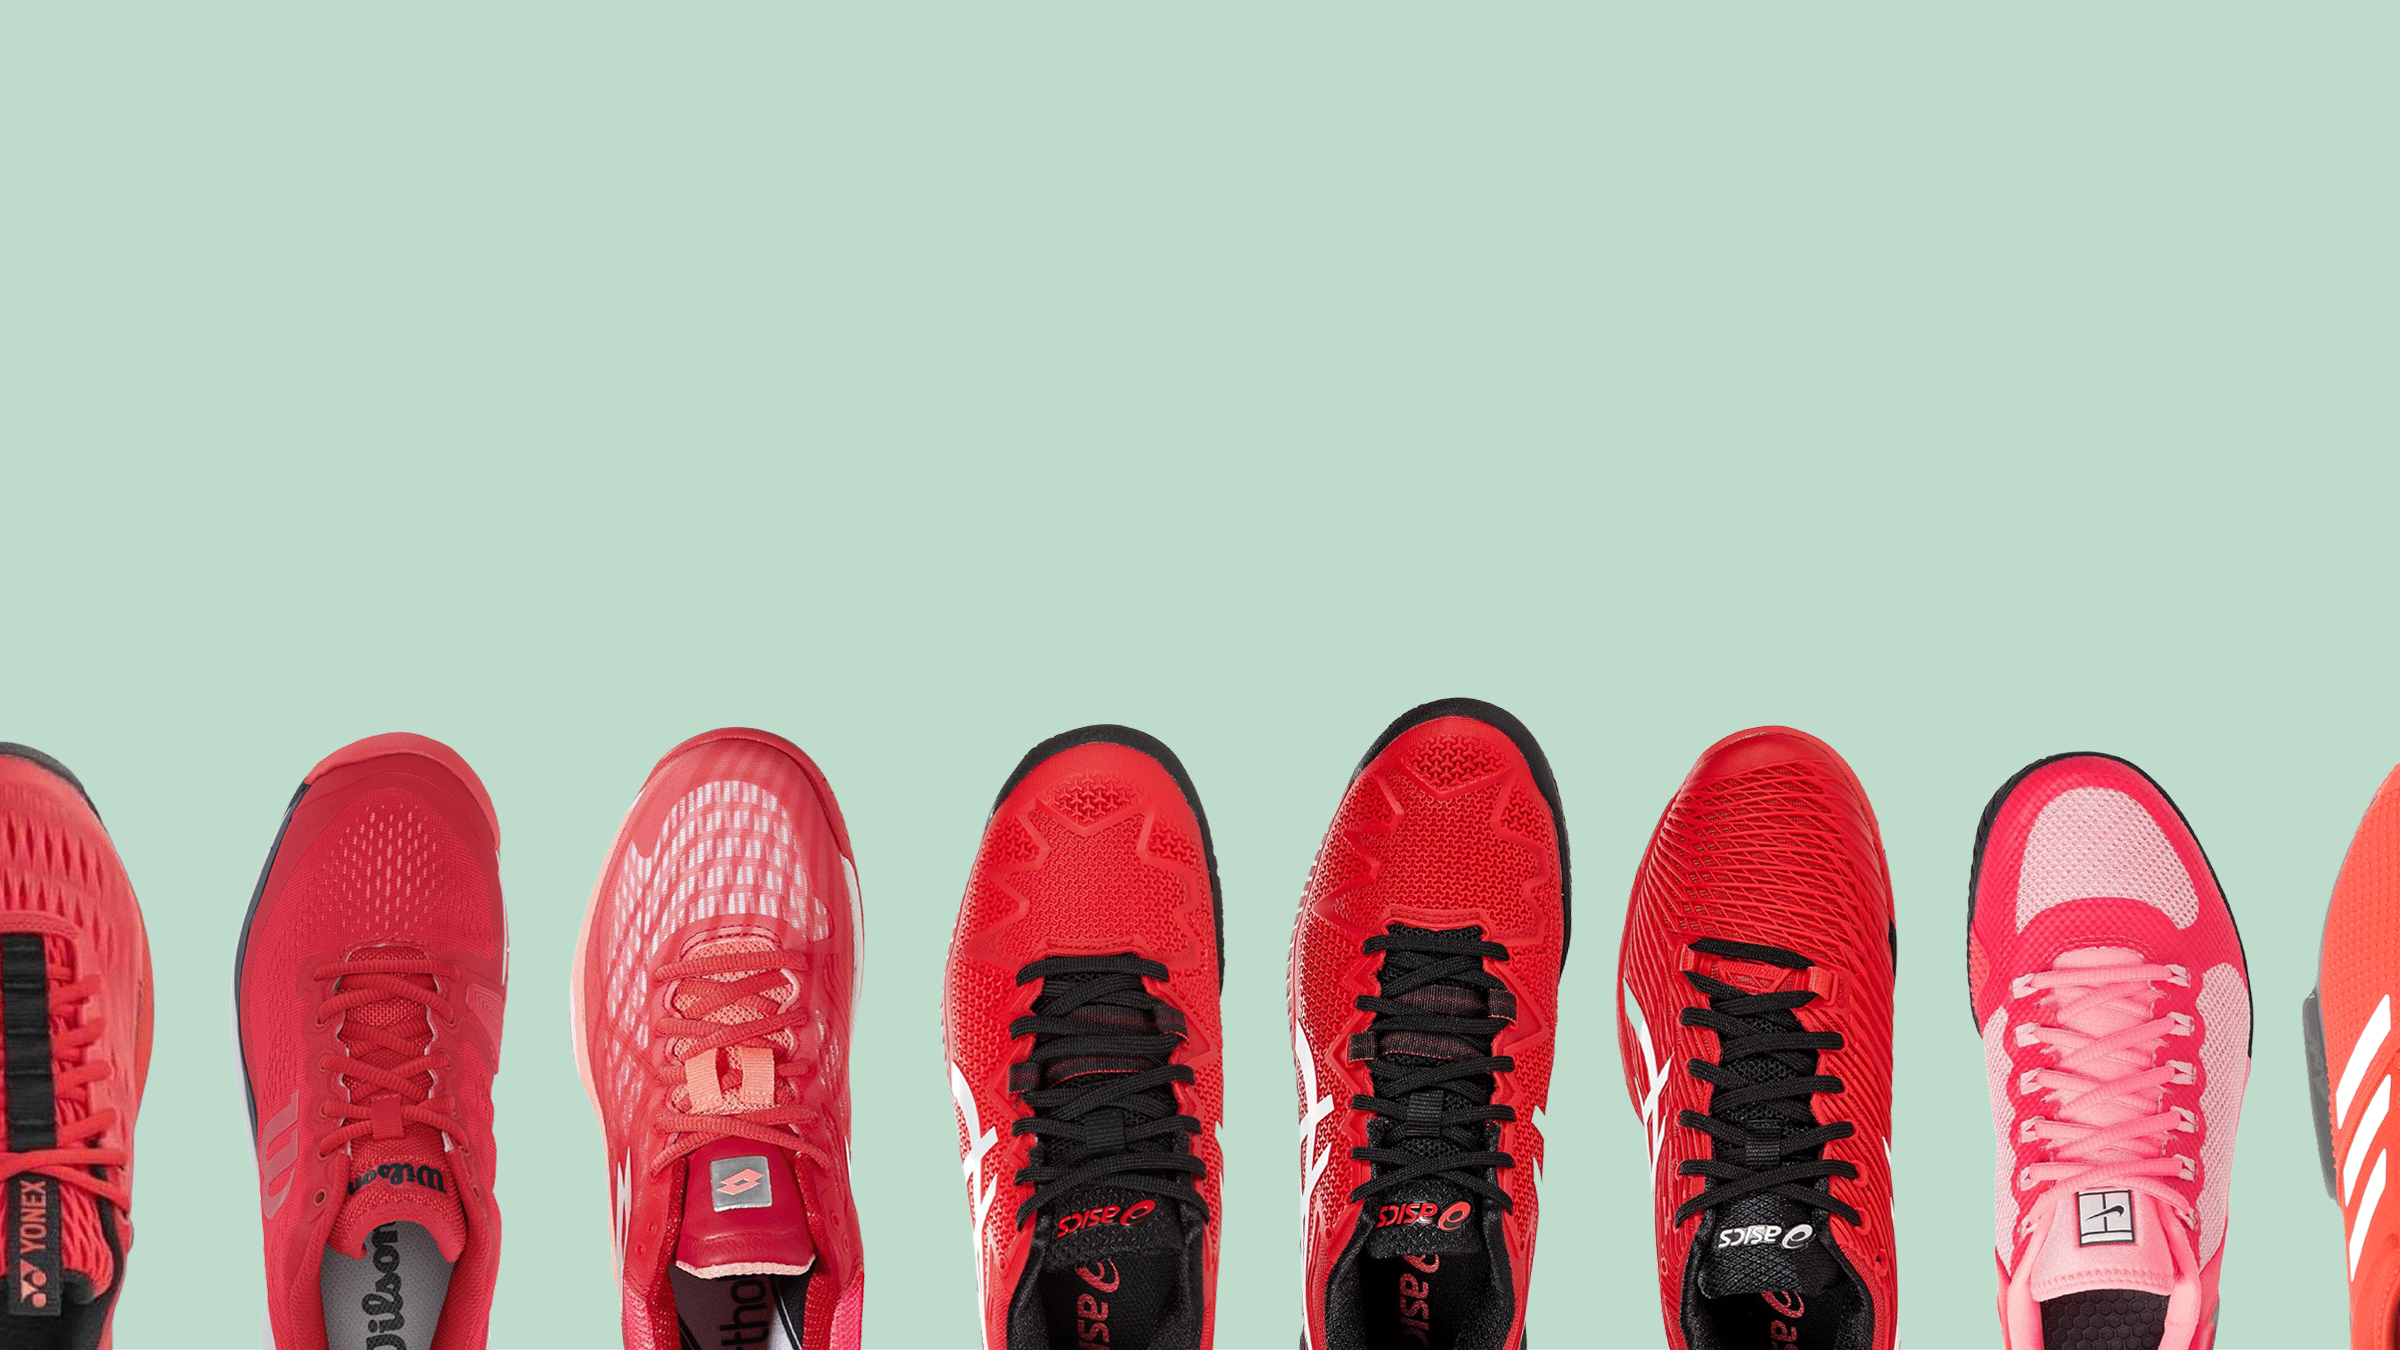 8 Best Red Tennis Shoes in 2022